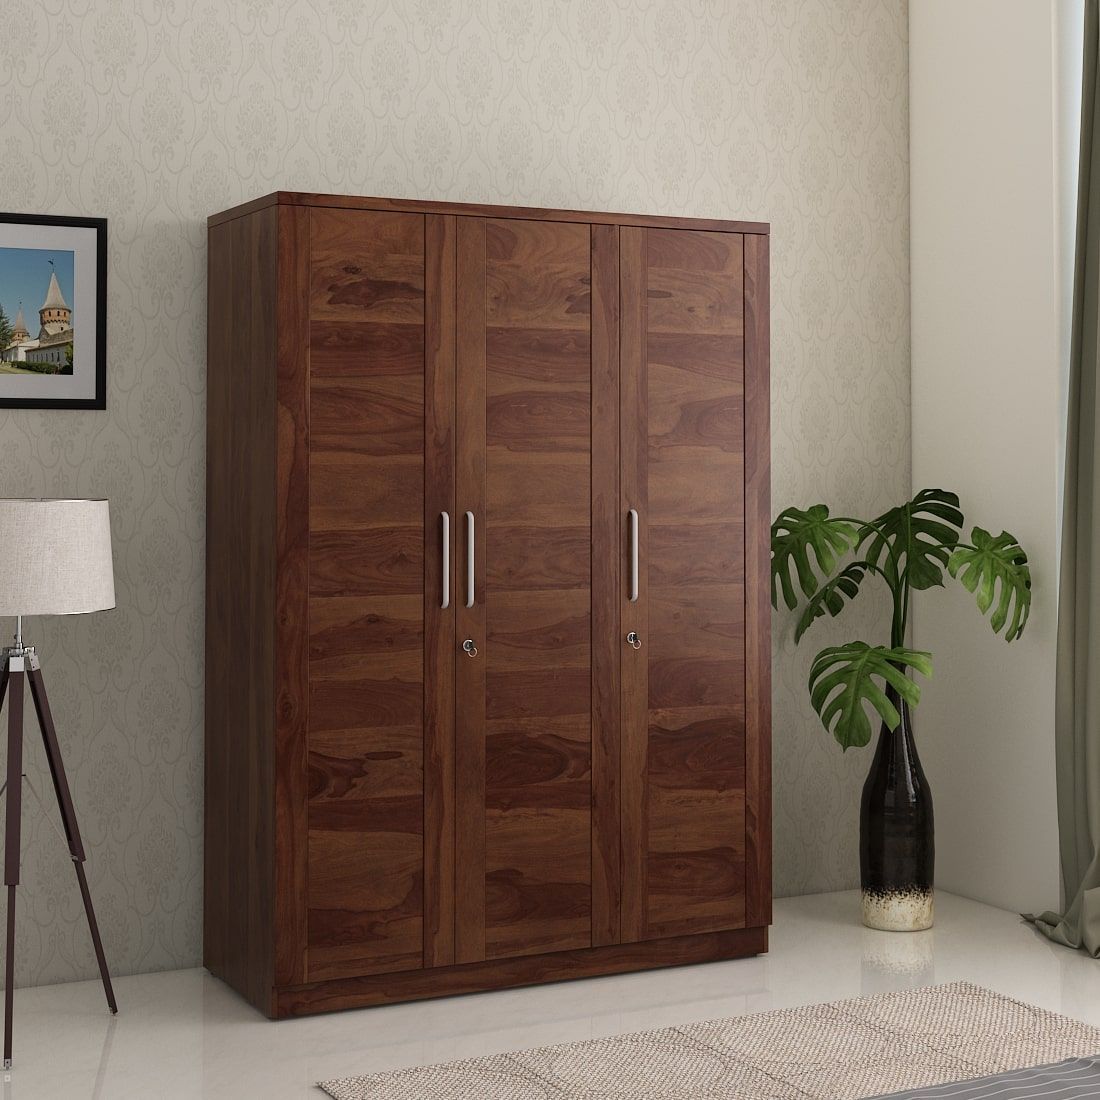 Kosmo Grace 3 Door Wardrobe Without Mirror Sheesham | Spacewood Ecommerce Intended For Cheap 3 Door Wardrobes (View 3 of 15)